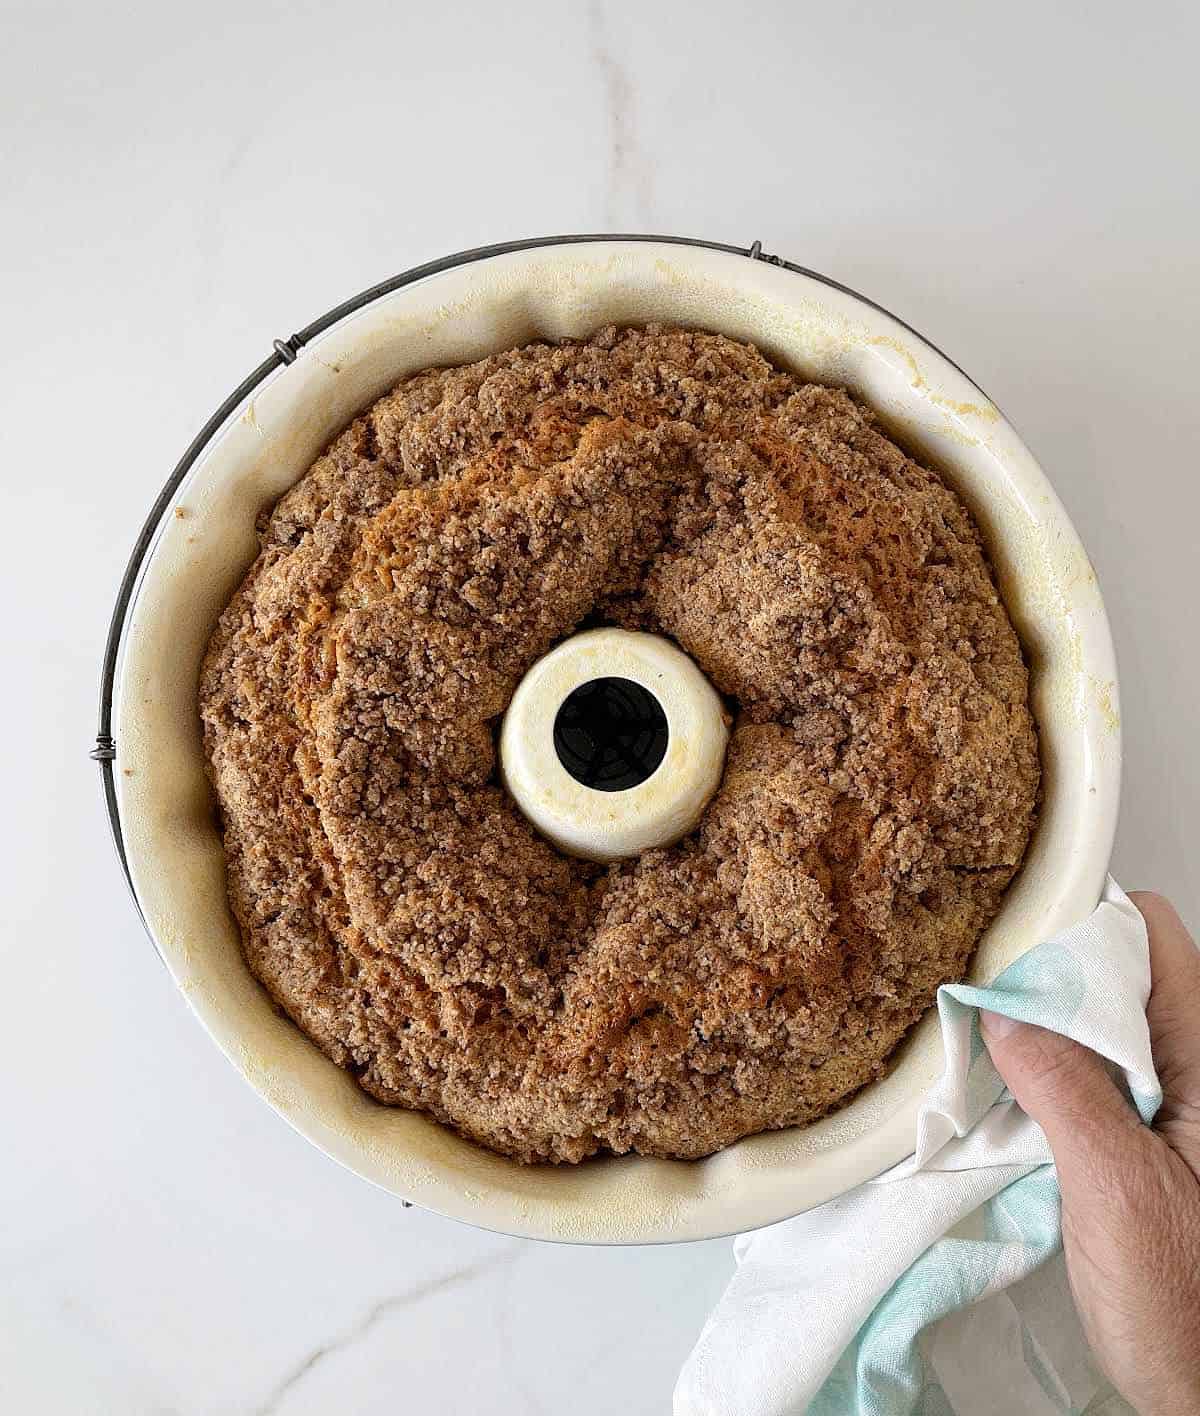 Baked bundt cake in white pan on white surface, hand holding kitchen towel